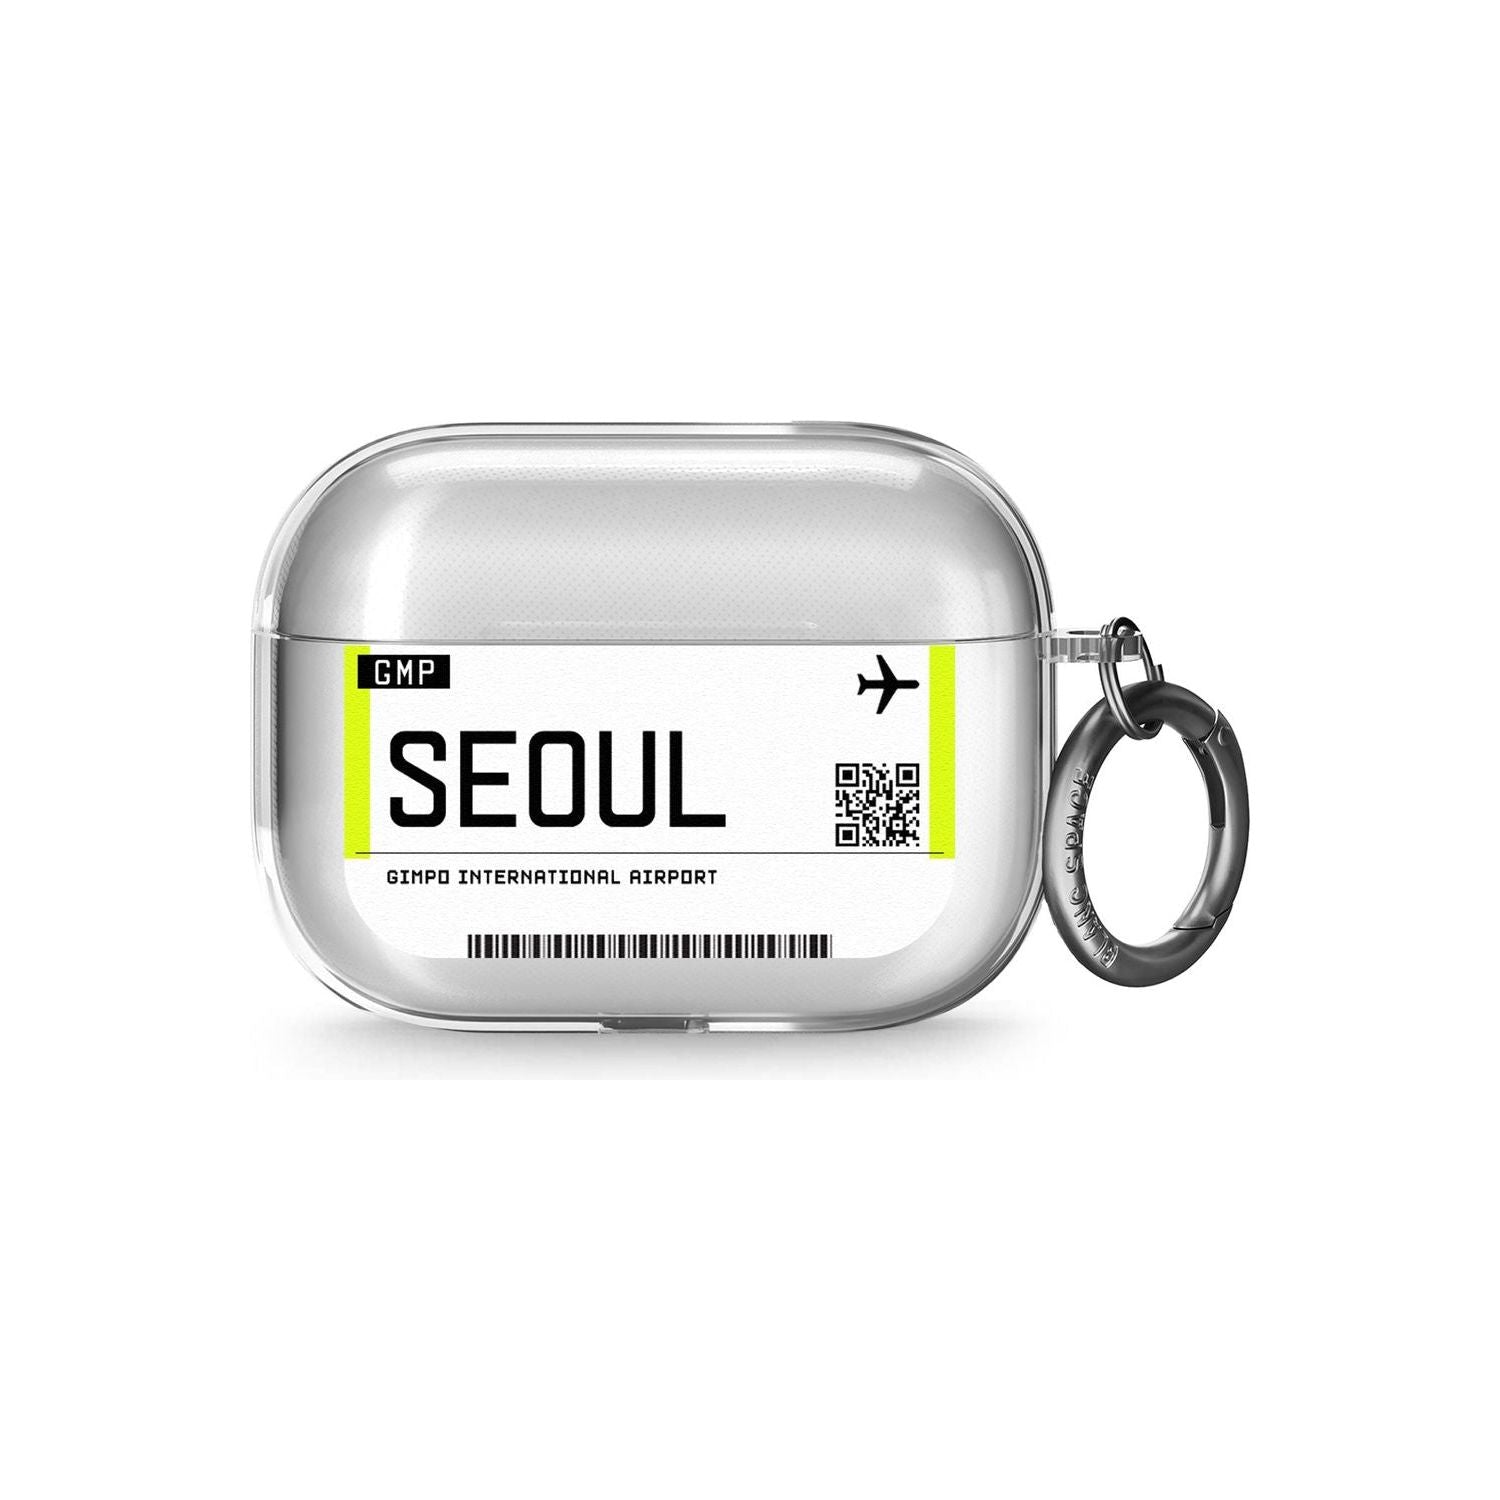 Seoul Boarding Pass Airpods Pro Case